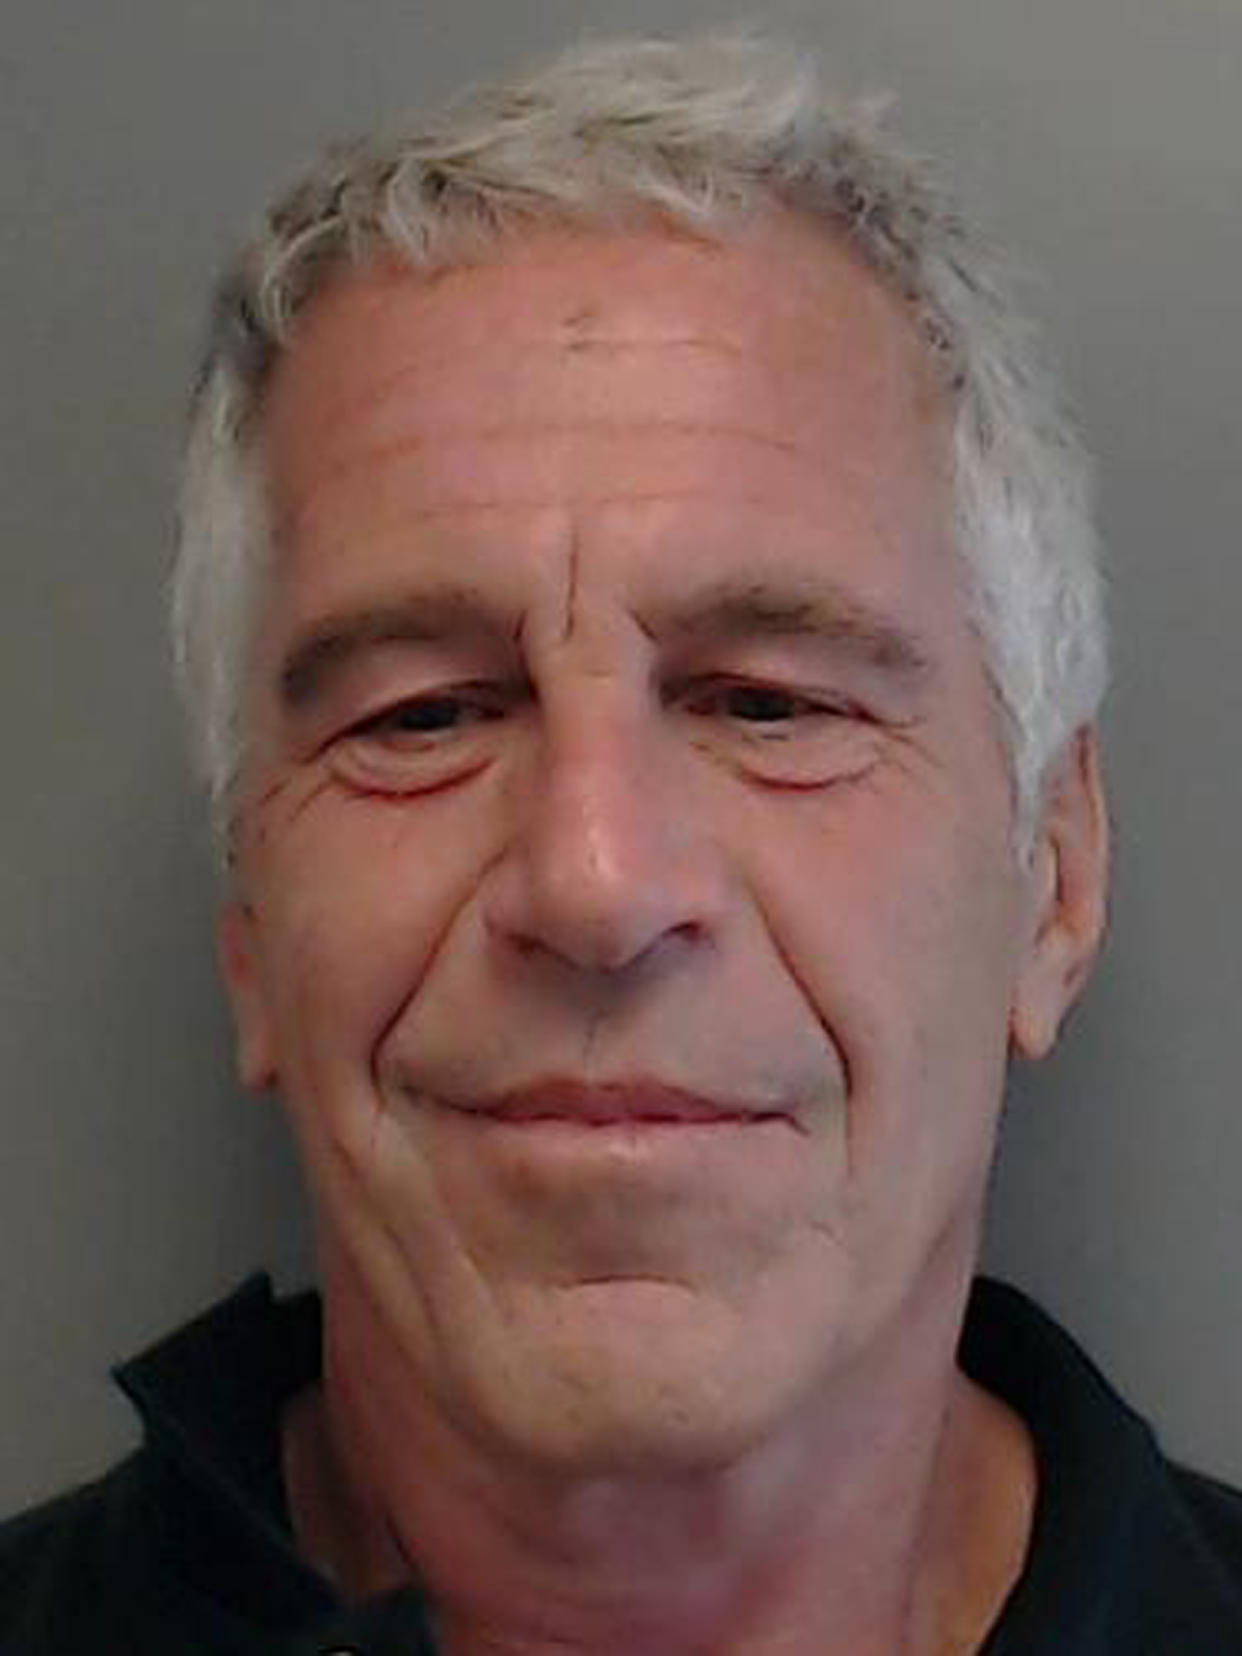 Jeffrey Epstein pictured in an undated Florida Department of Law Enforcement photo. (Photo: REUTERS/Florida Department of Law Enforcement/Handout via Reuters)